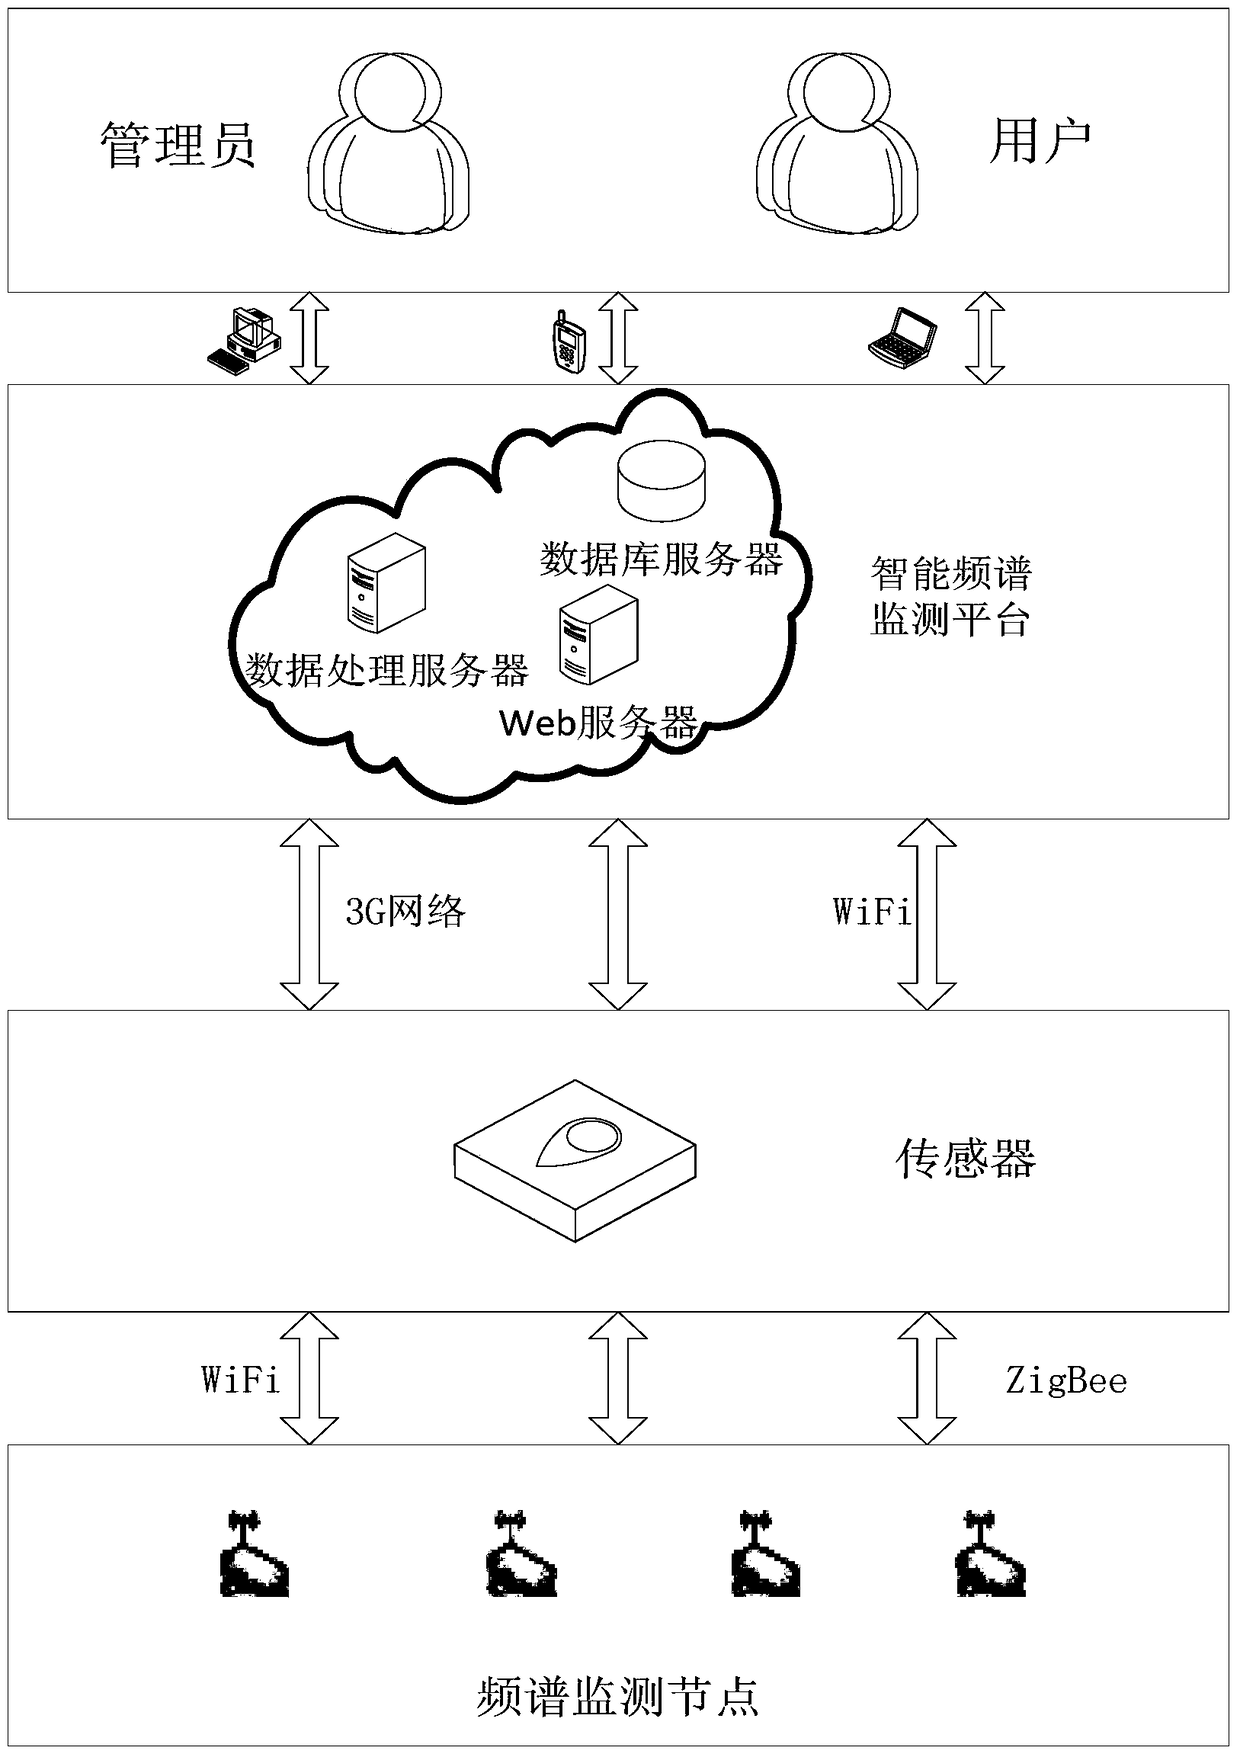 An intelligent wireless spectrum online monitoring system and its implementation method